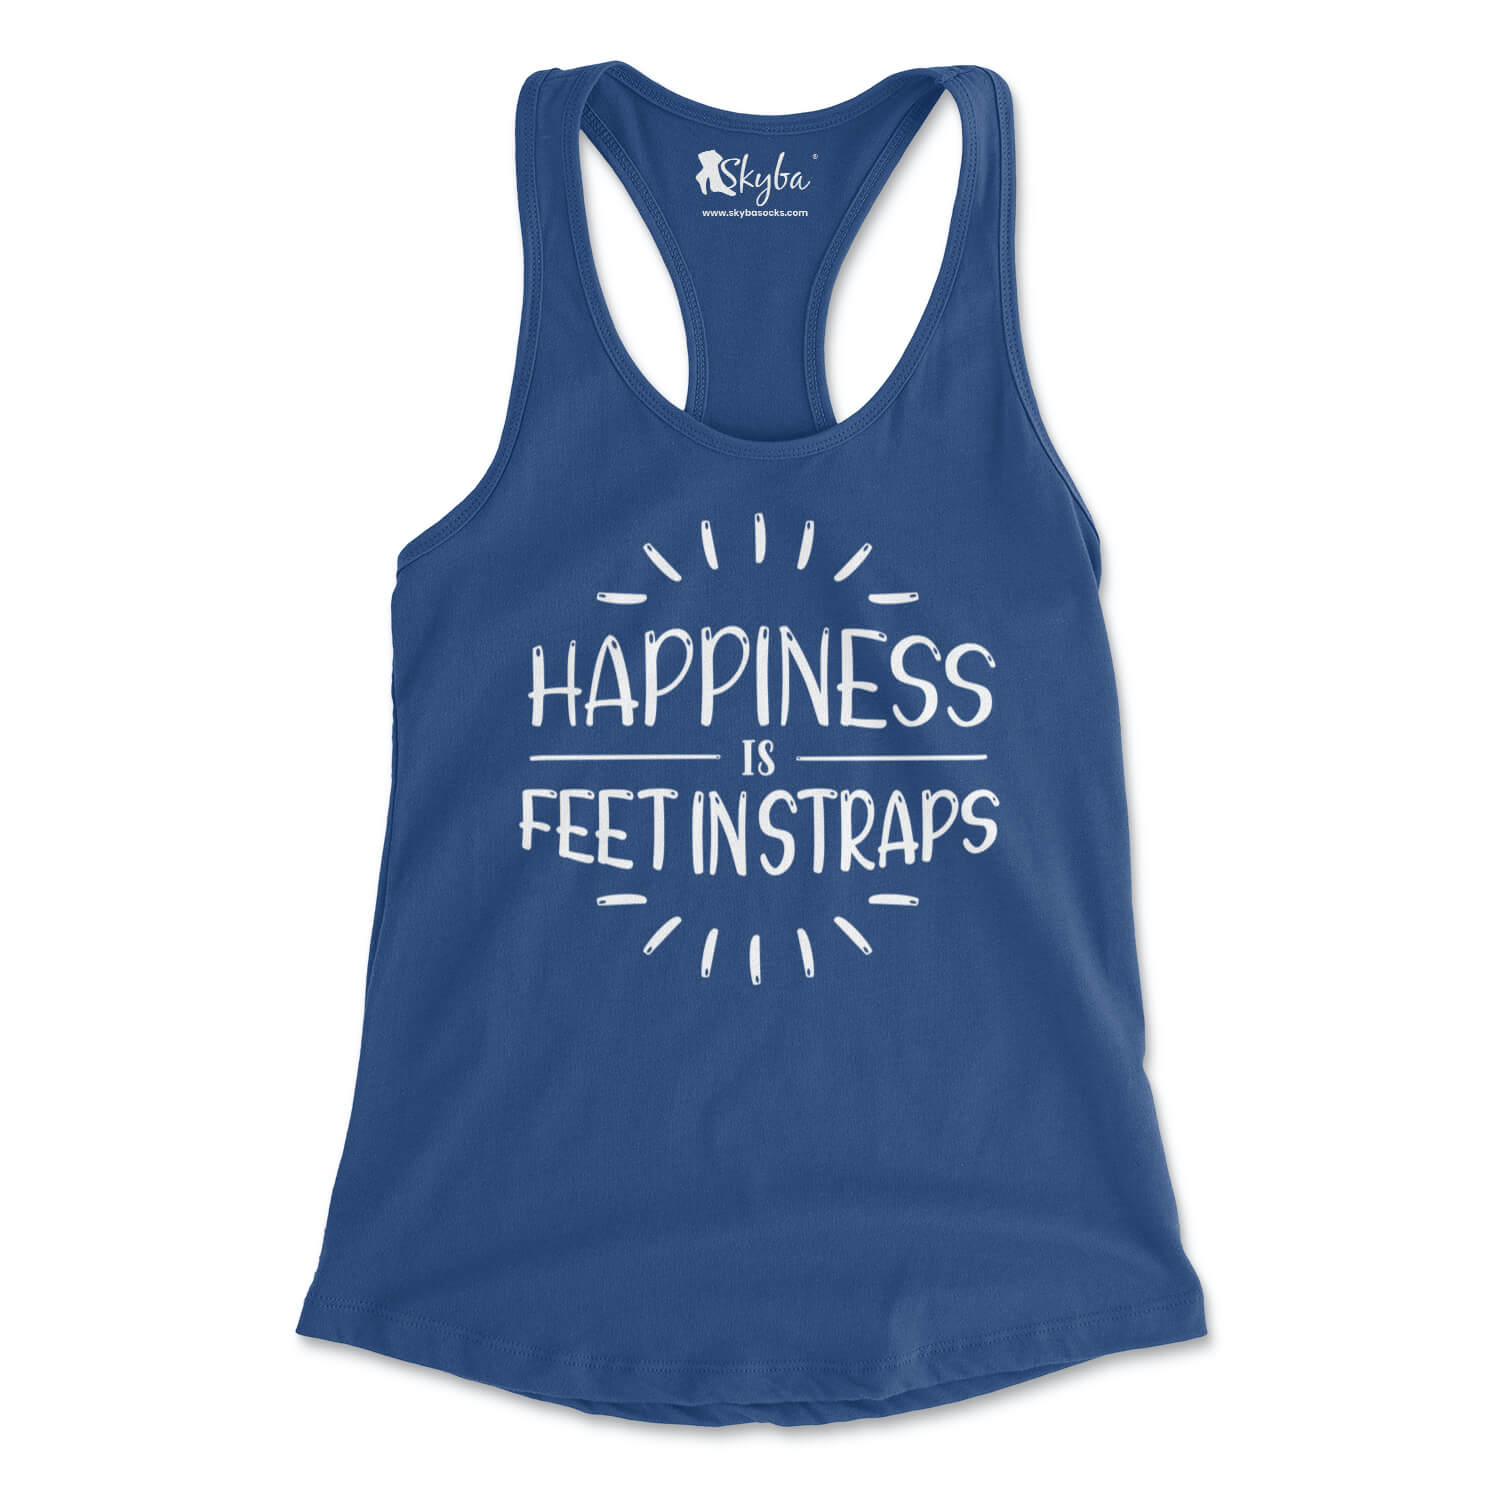 Happiness is Feet in Straps - Women's Slim Fit Tank Skyba Tank Top